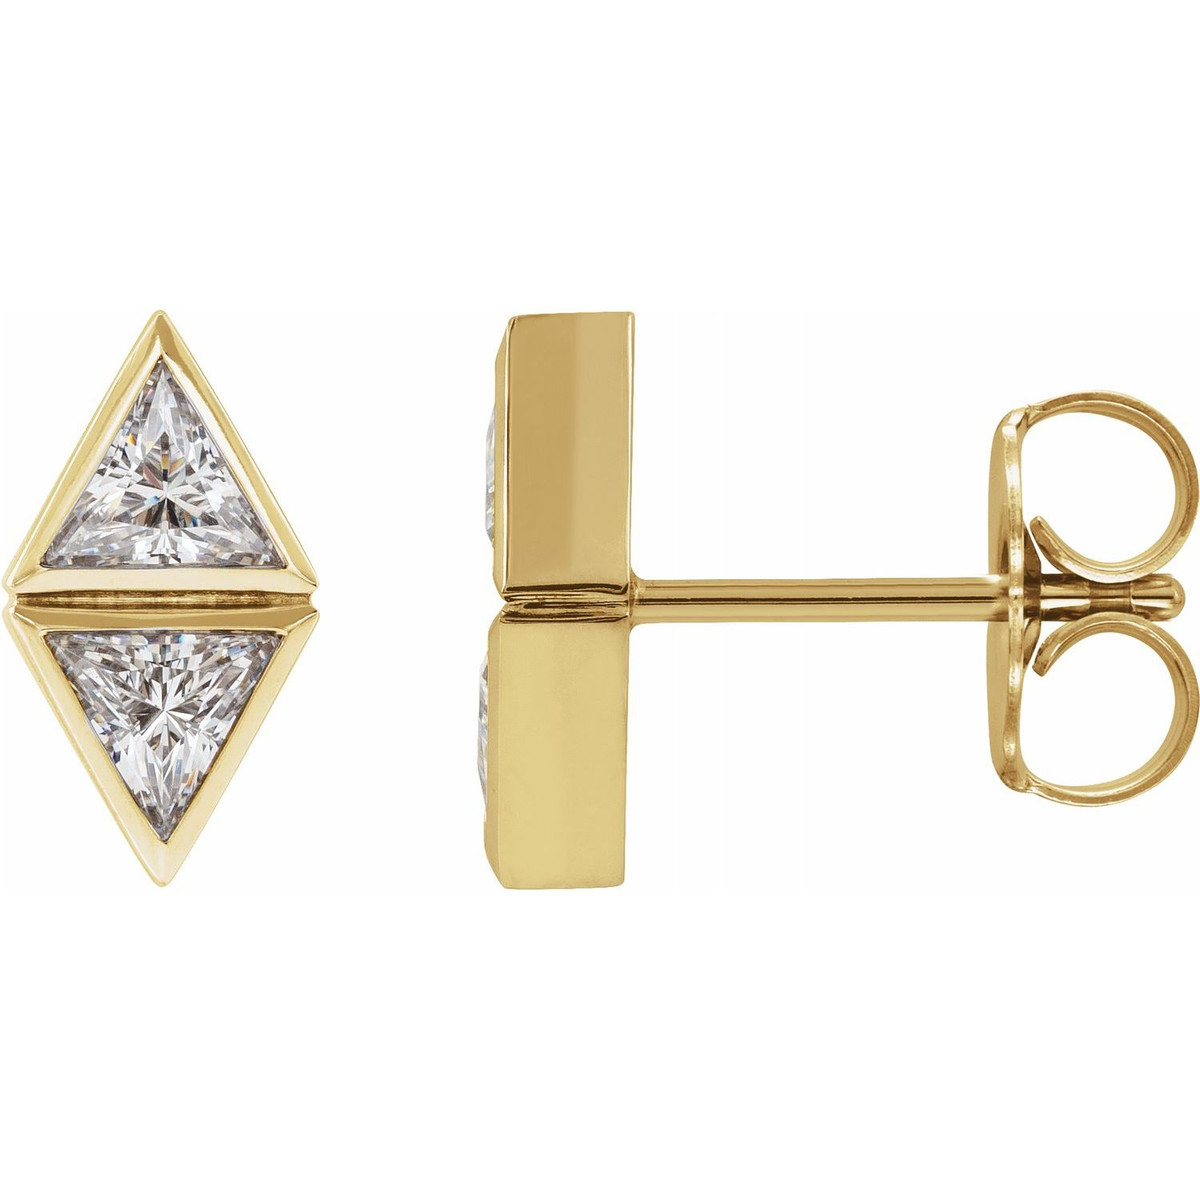 Hyde Park Collection 14K Yellow Gold Stud Diamond Earrings-26050